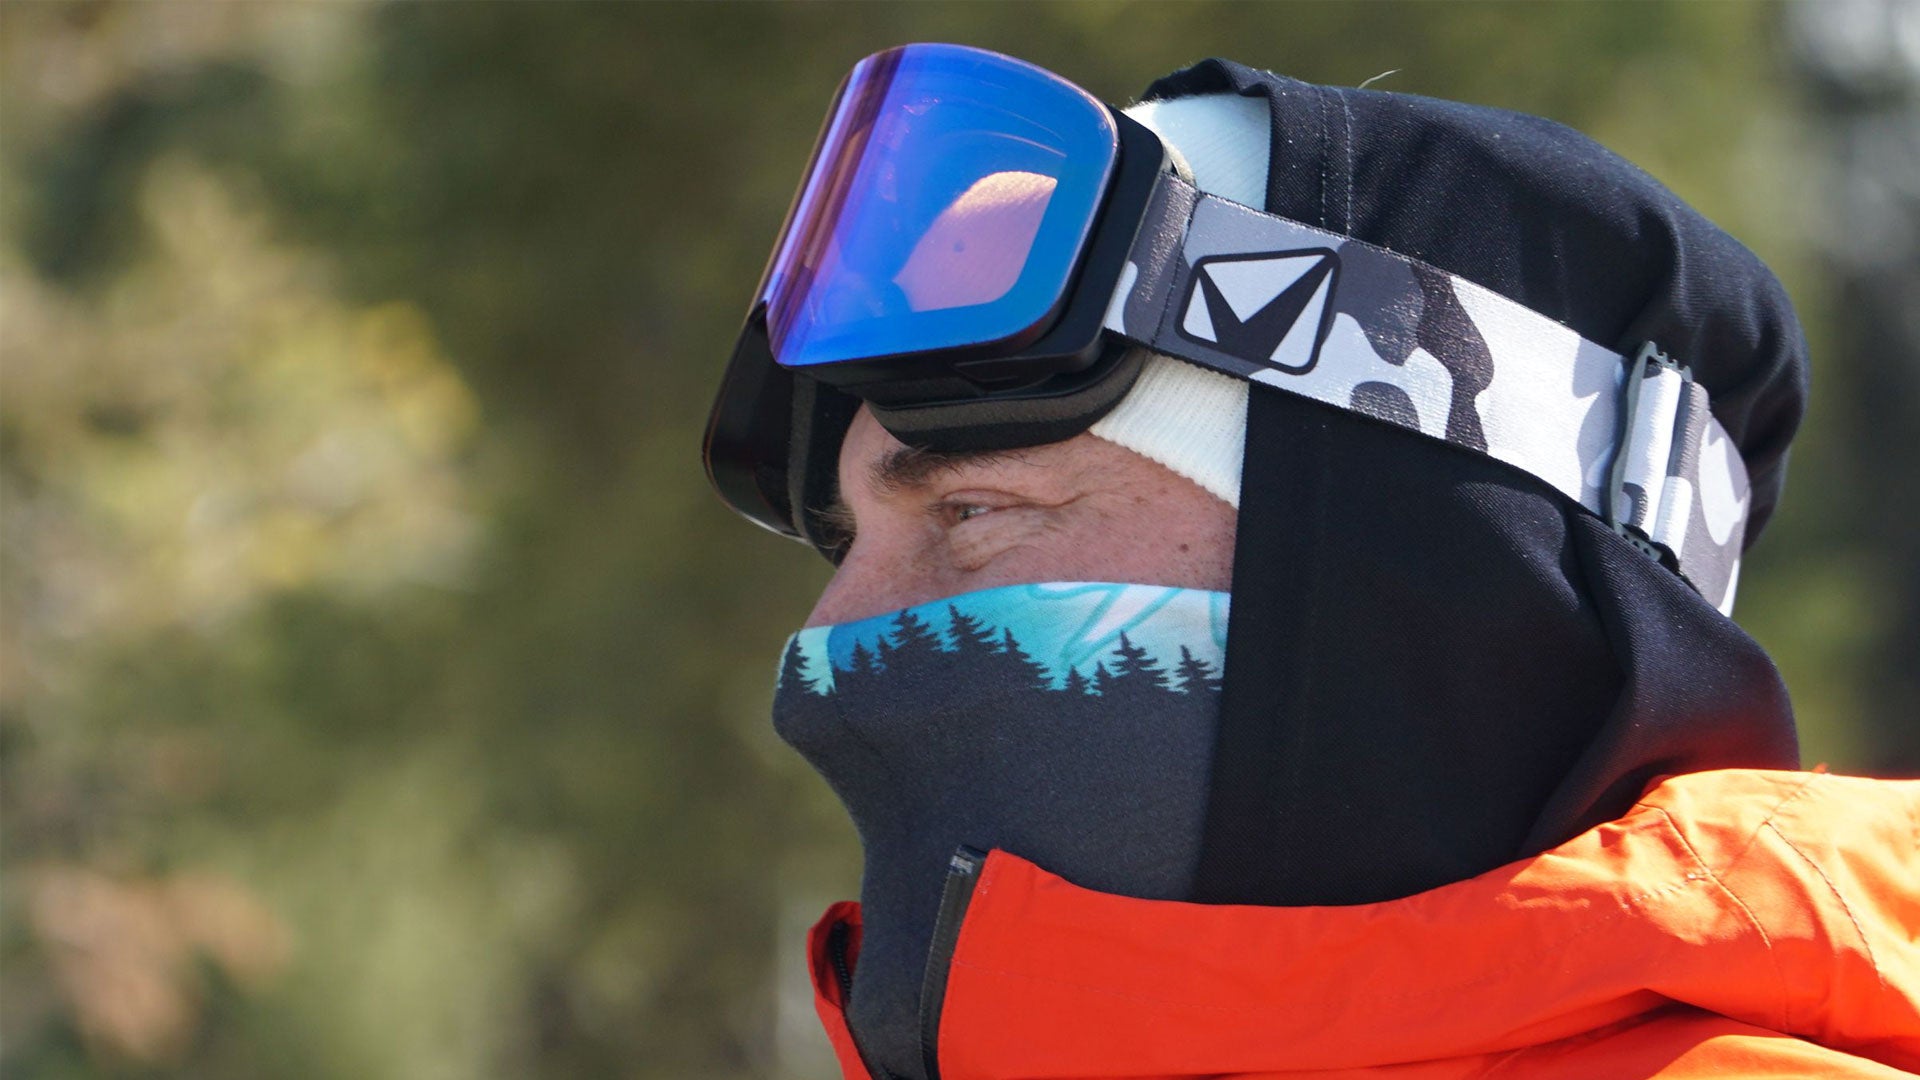 The STAGE Prop Goggle with Detector Lens. STAGE manufacturers high-quality ski goggles at affordable prices. The Prop series is available in Detector, Smoke, and Magnetic Lens Versions